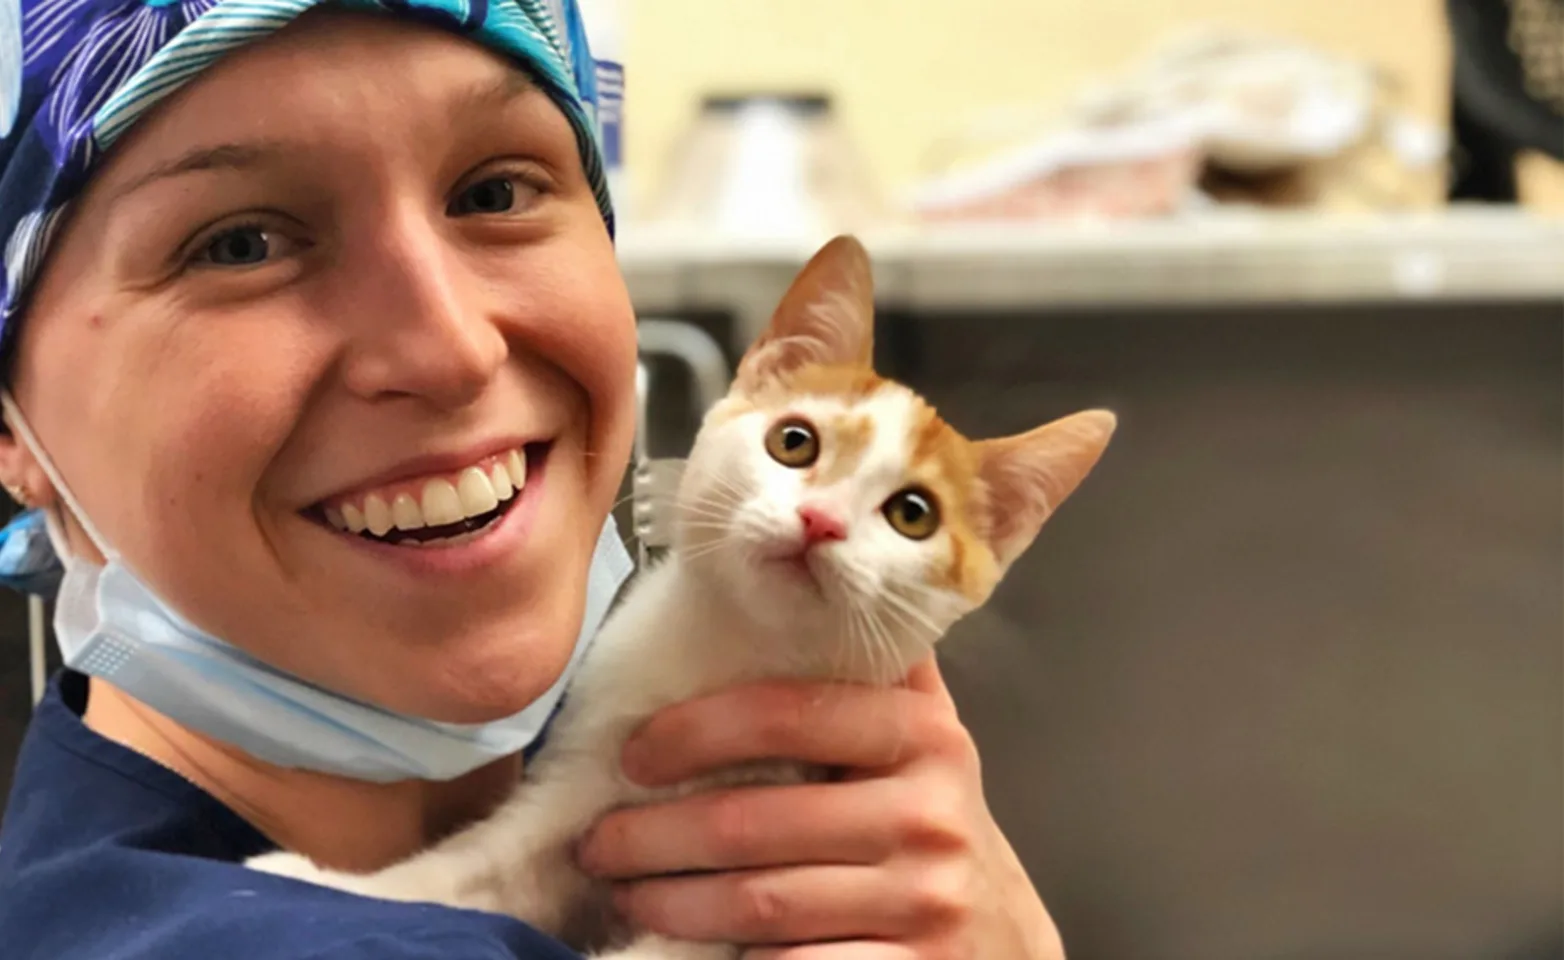 A smiling veterinary professional holding a small kitten